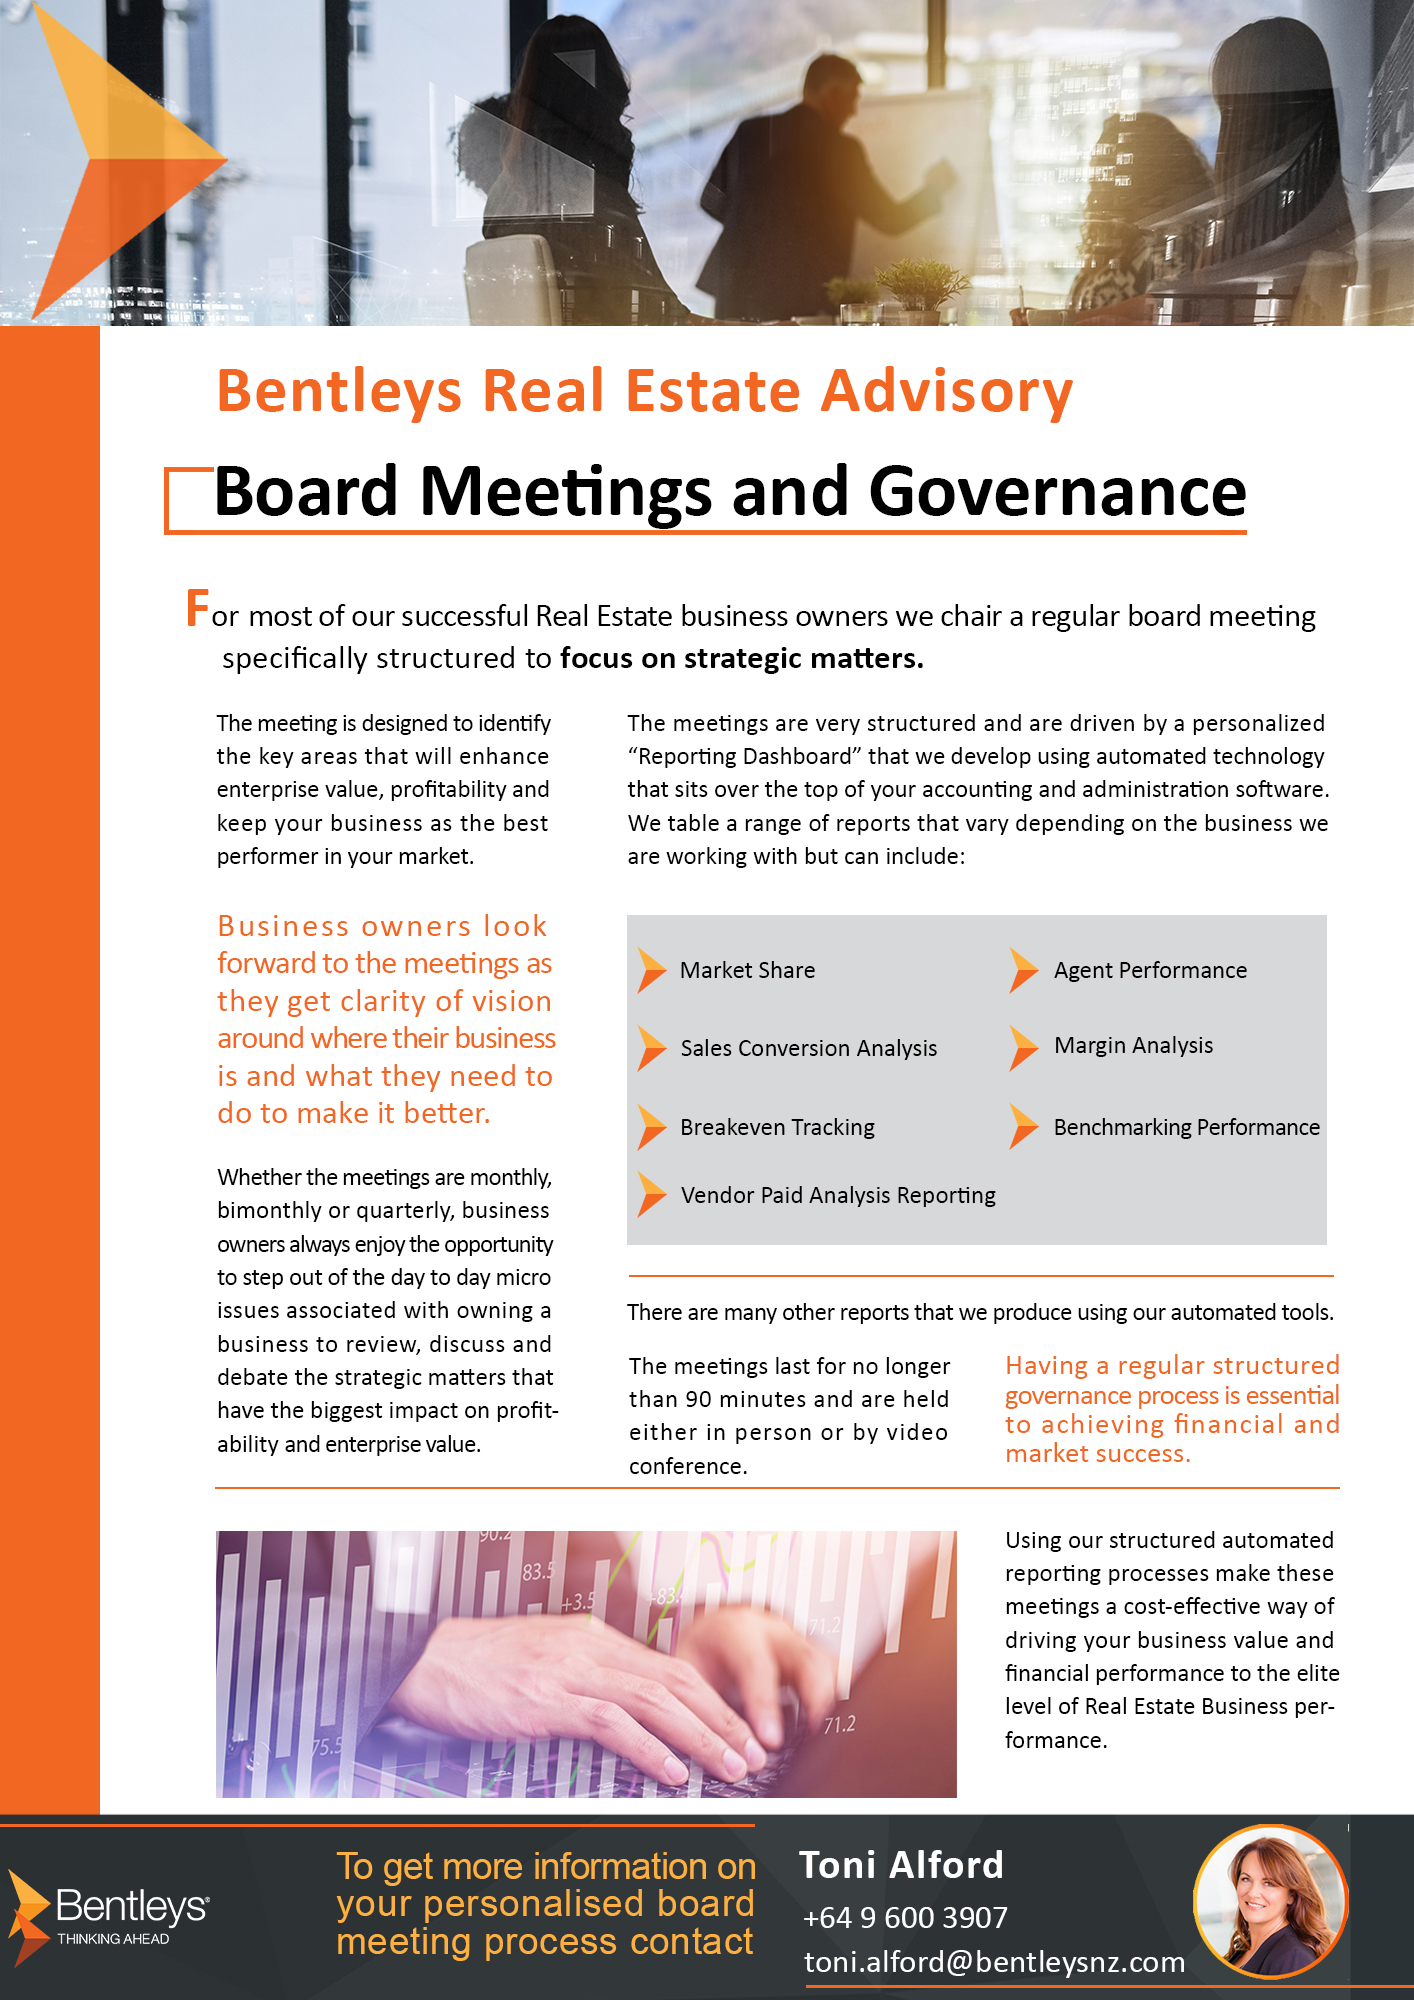 Board Meeting and Governance